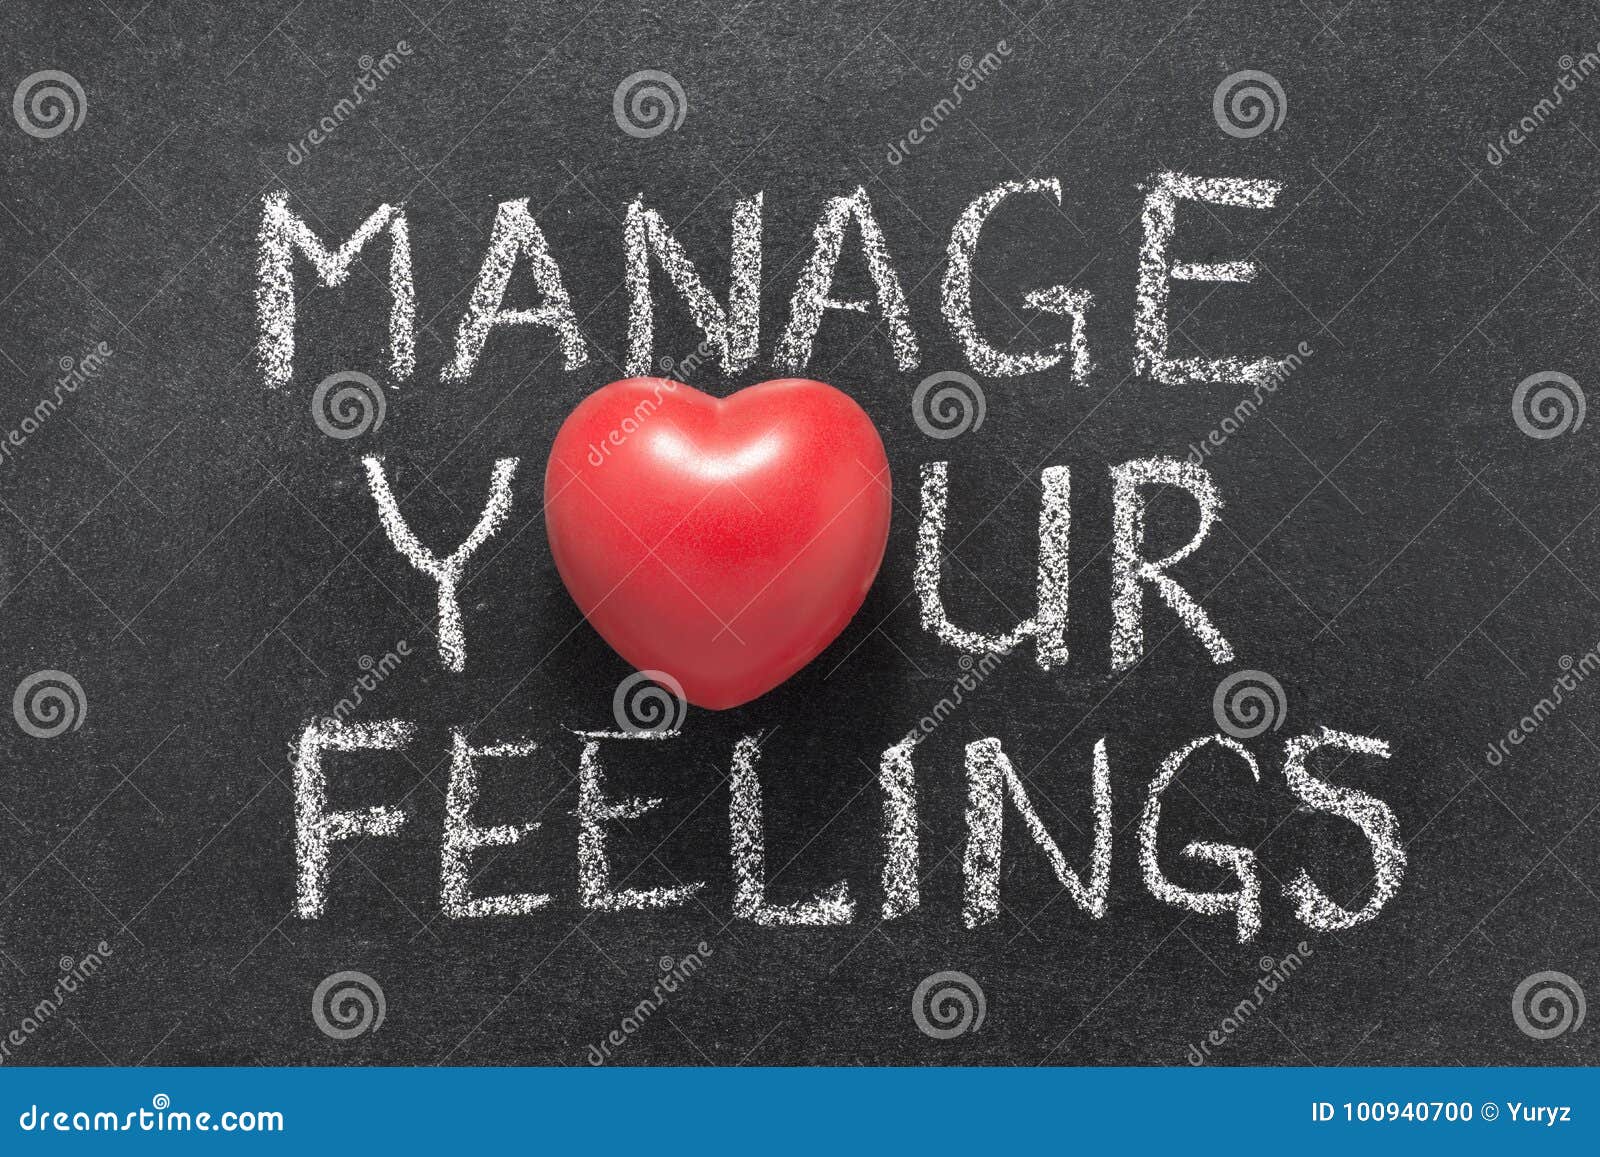 manage your feelings heart